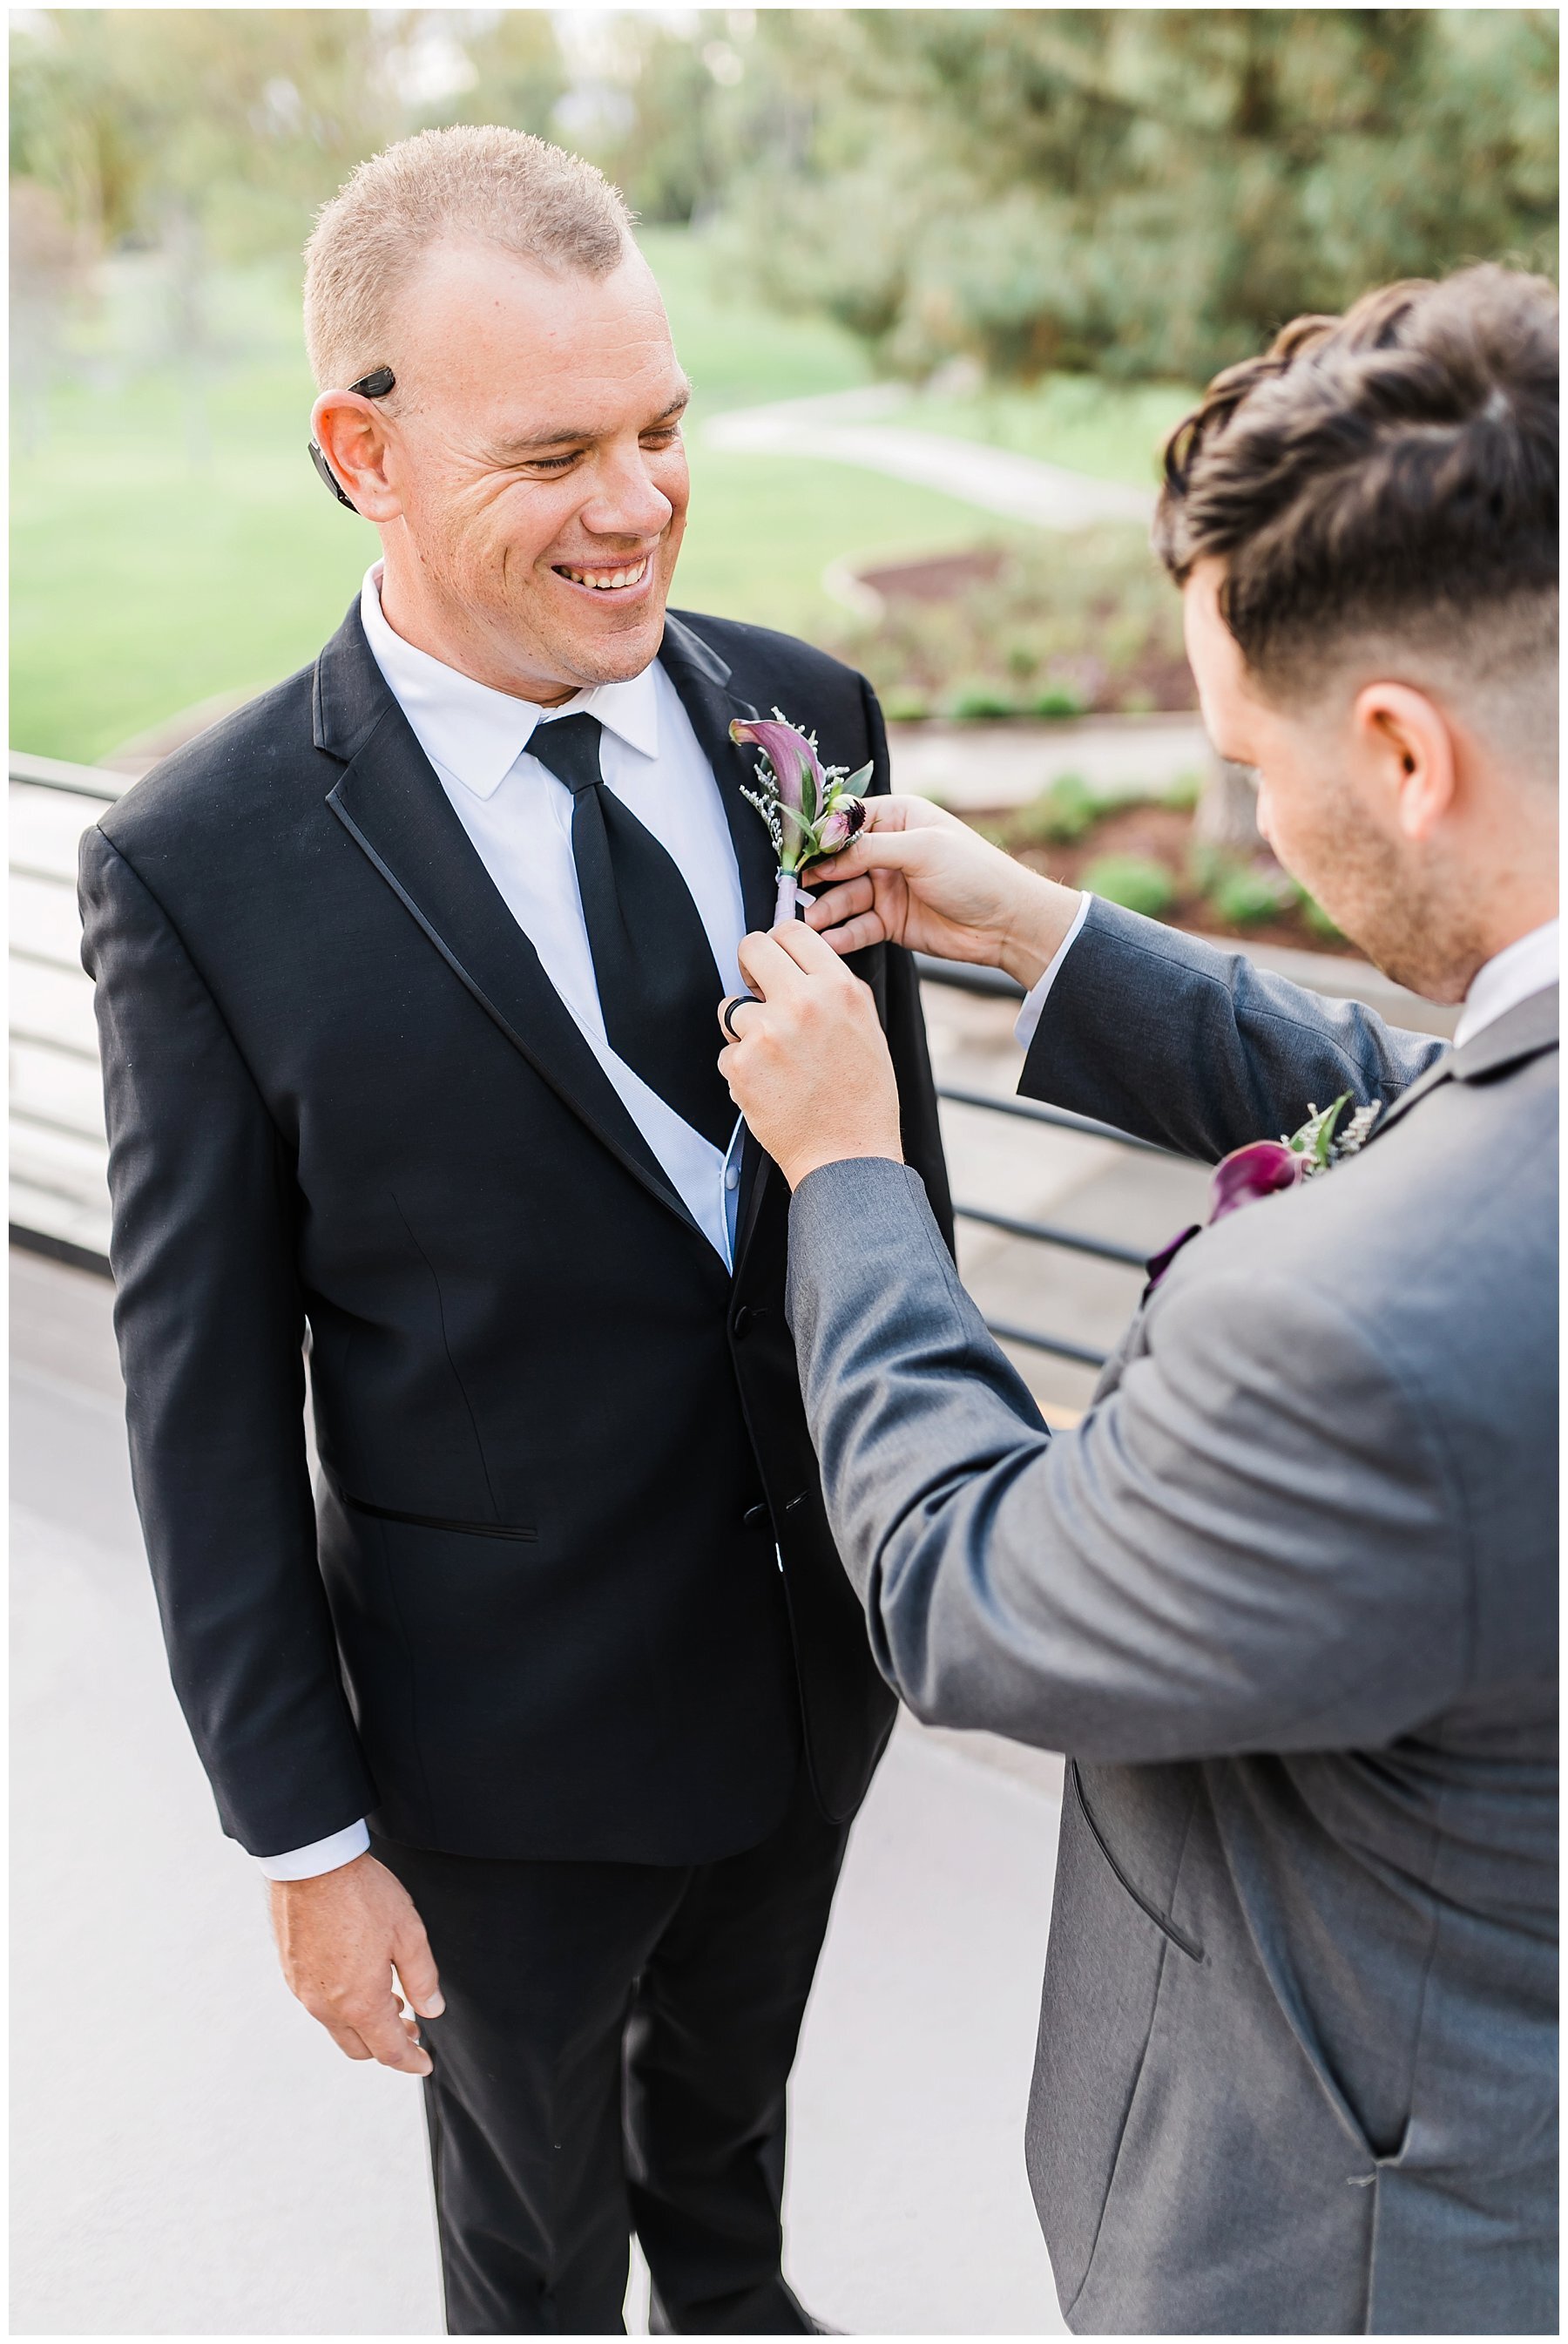  best man helping groom with boutonniere 